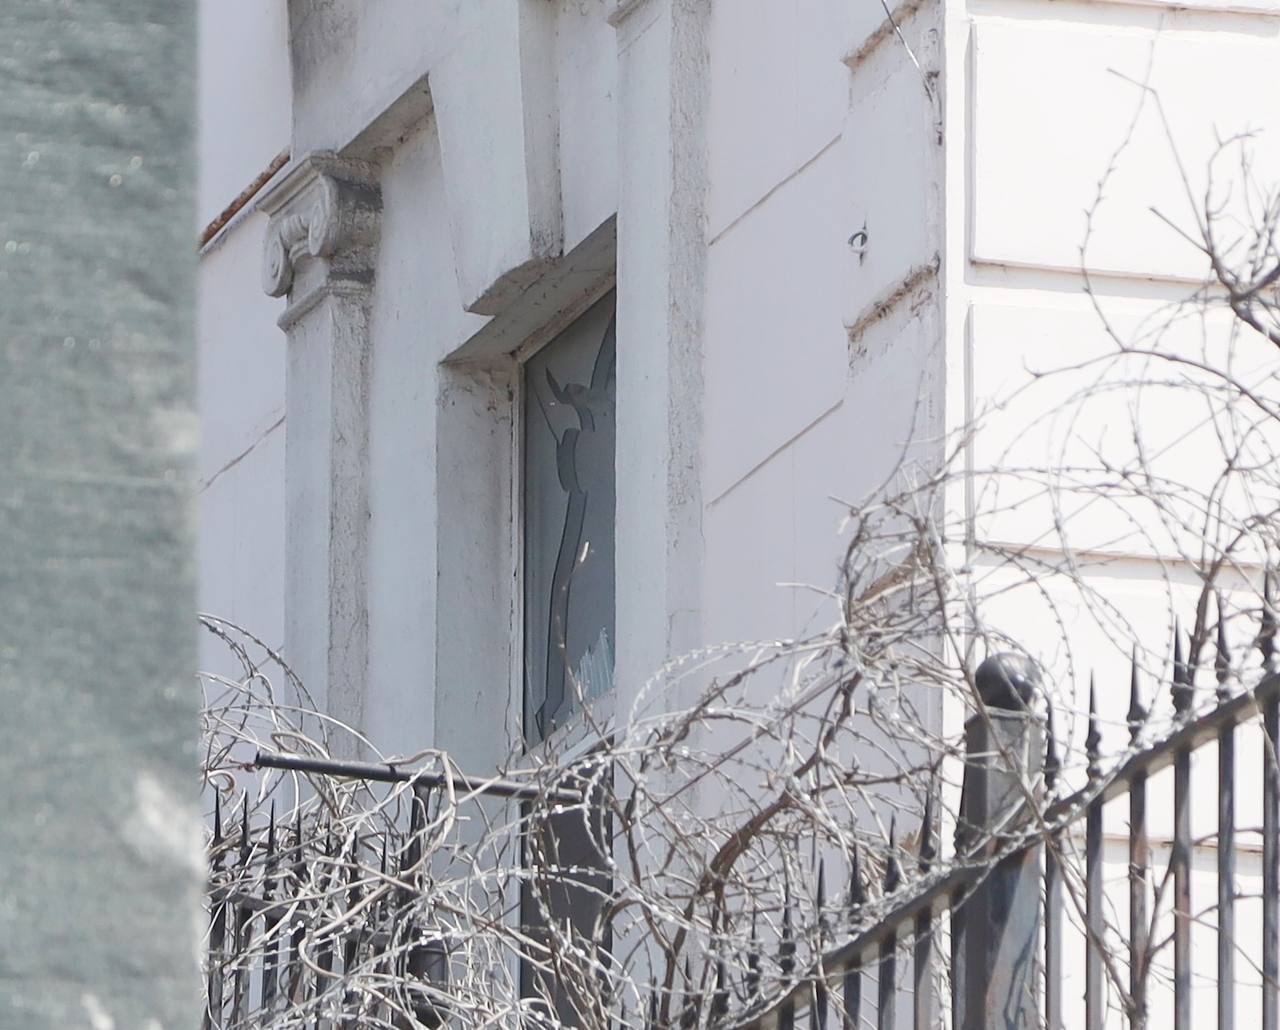 Chinese consulate damaged in Odessa as a result of Russian missile attack